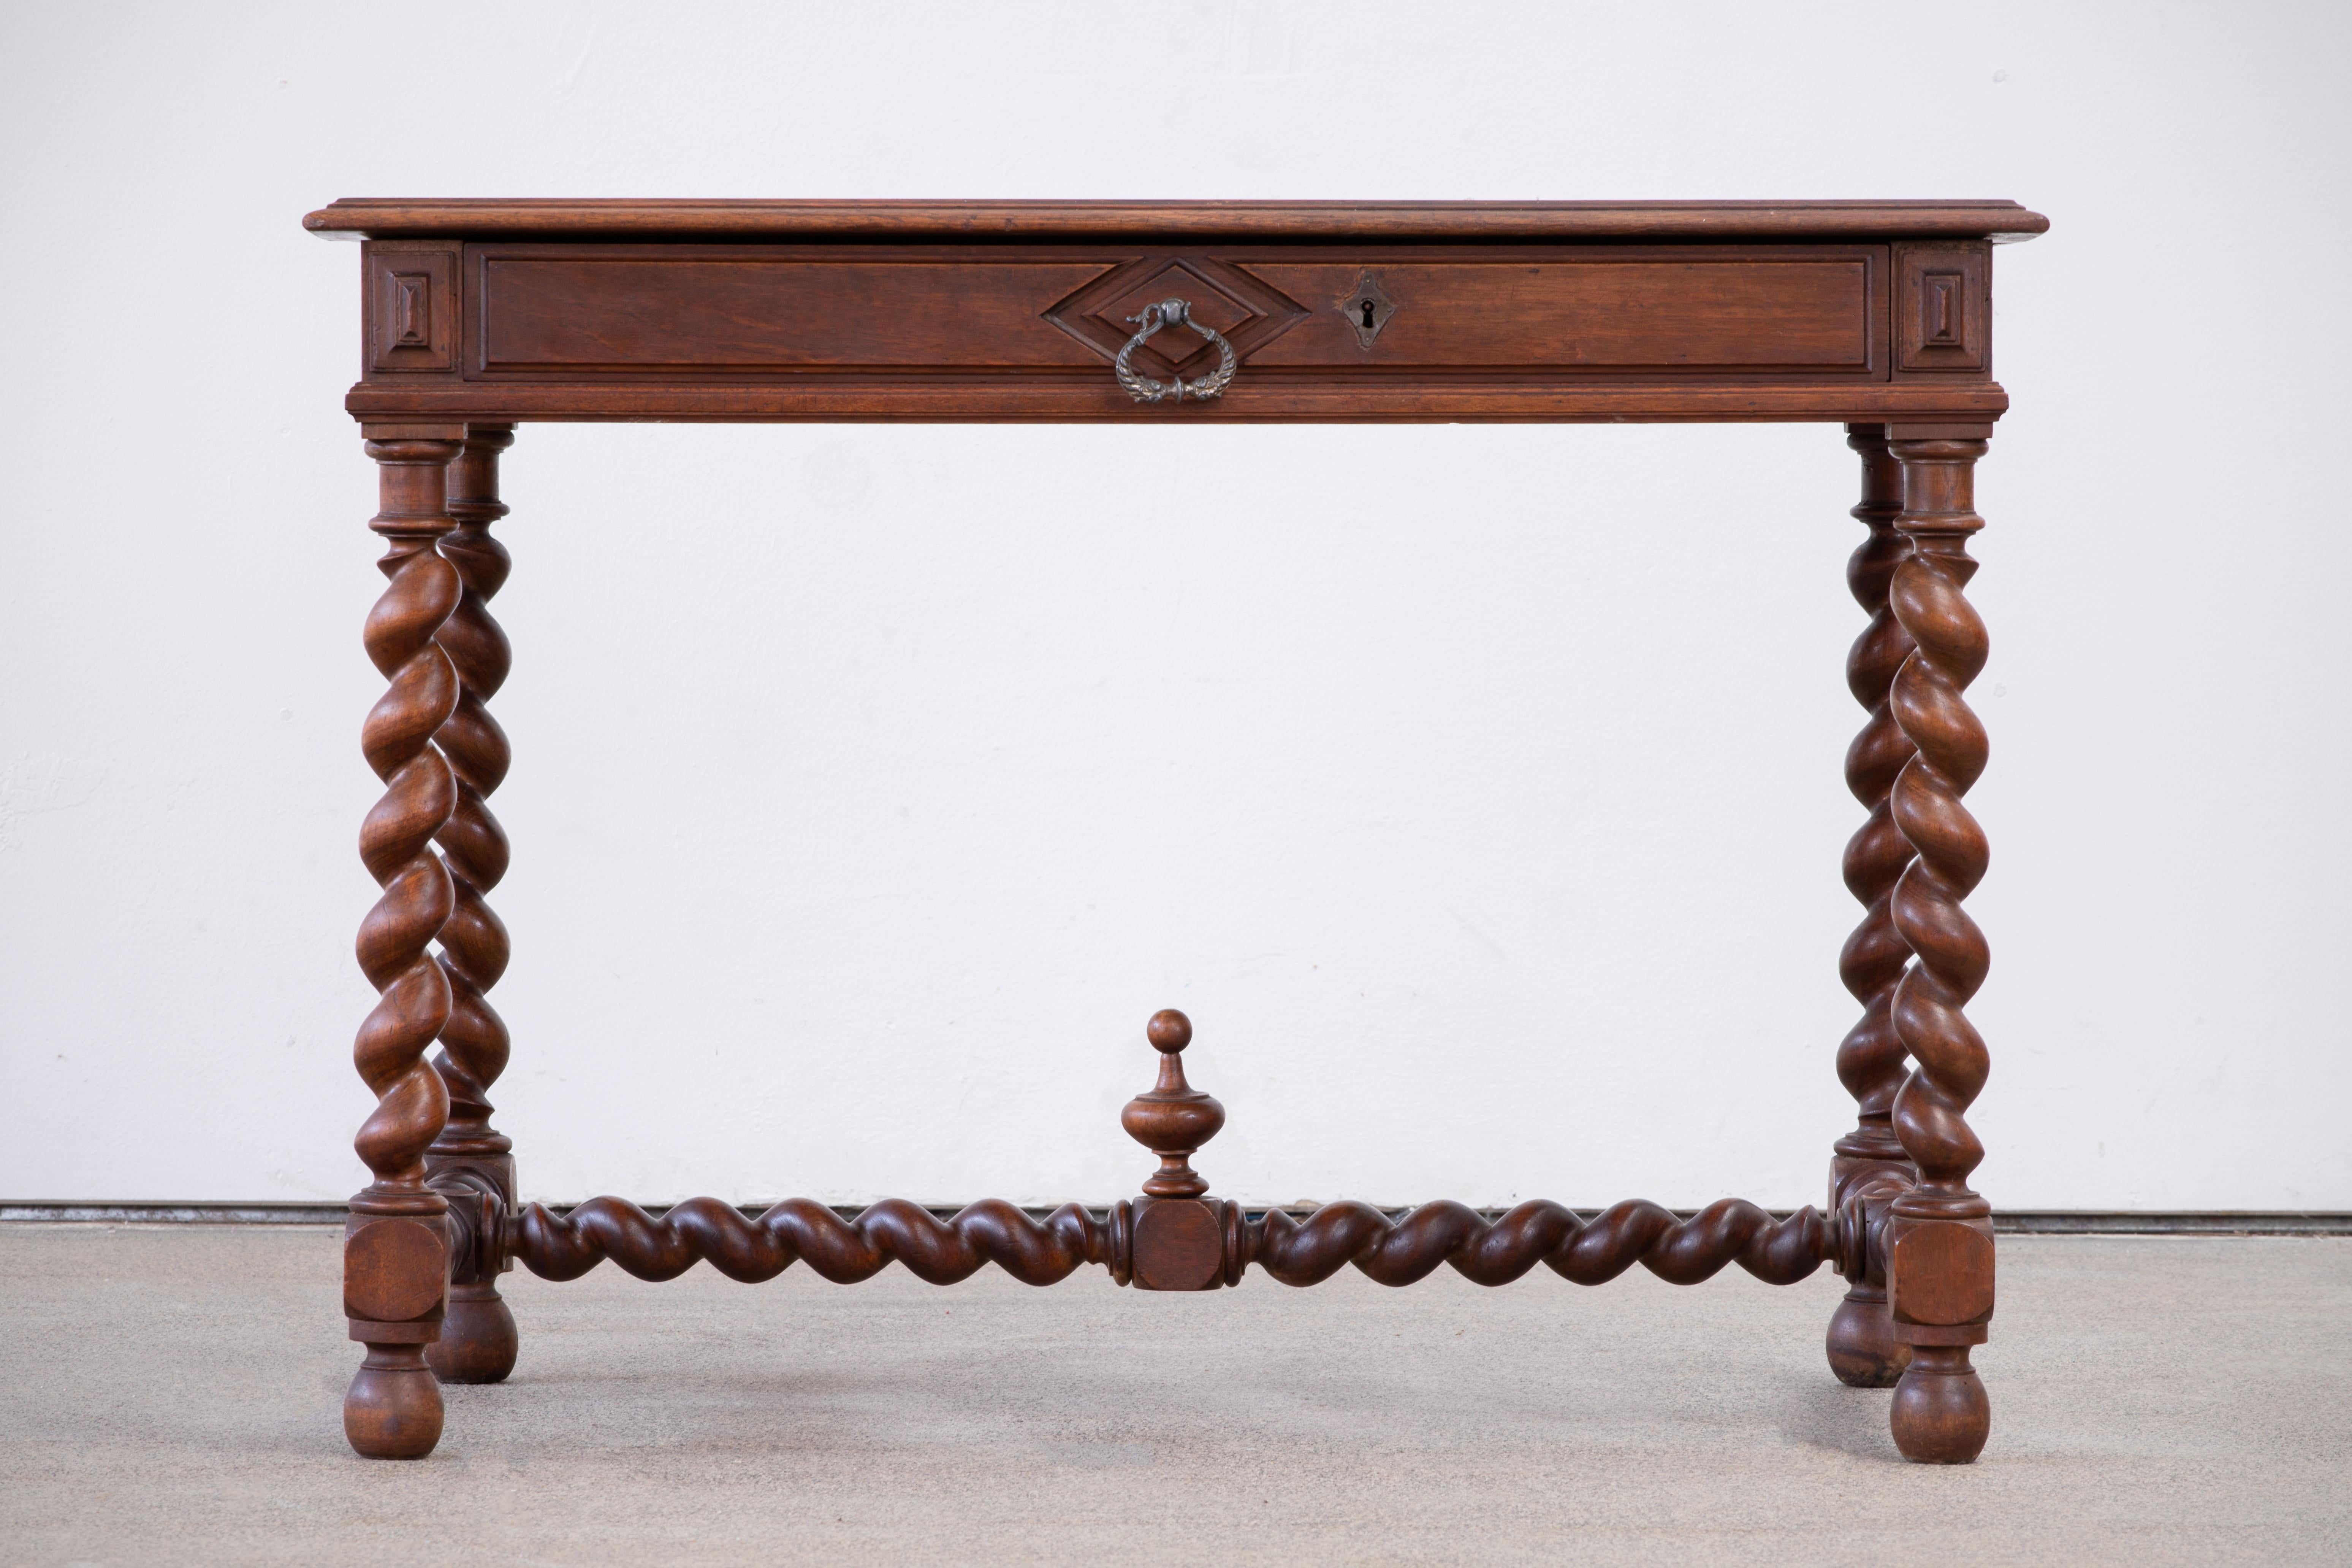 19th century Spanish antique oak desk, writting table with two drawers.
This elegant console was crafted in Spain, circa 1900, it features hand-carved details and turned legs. 
The narrow console is in good condition with a rich patinated